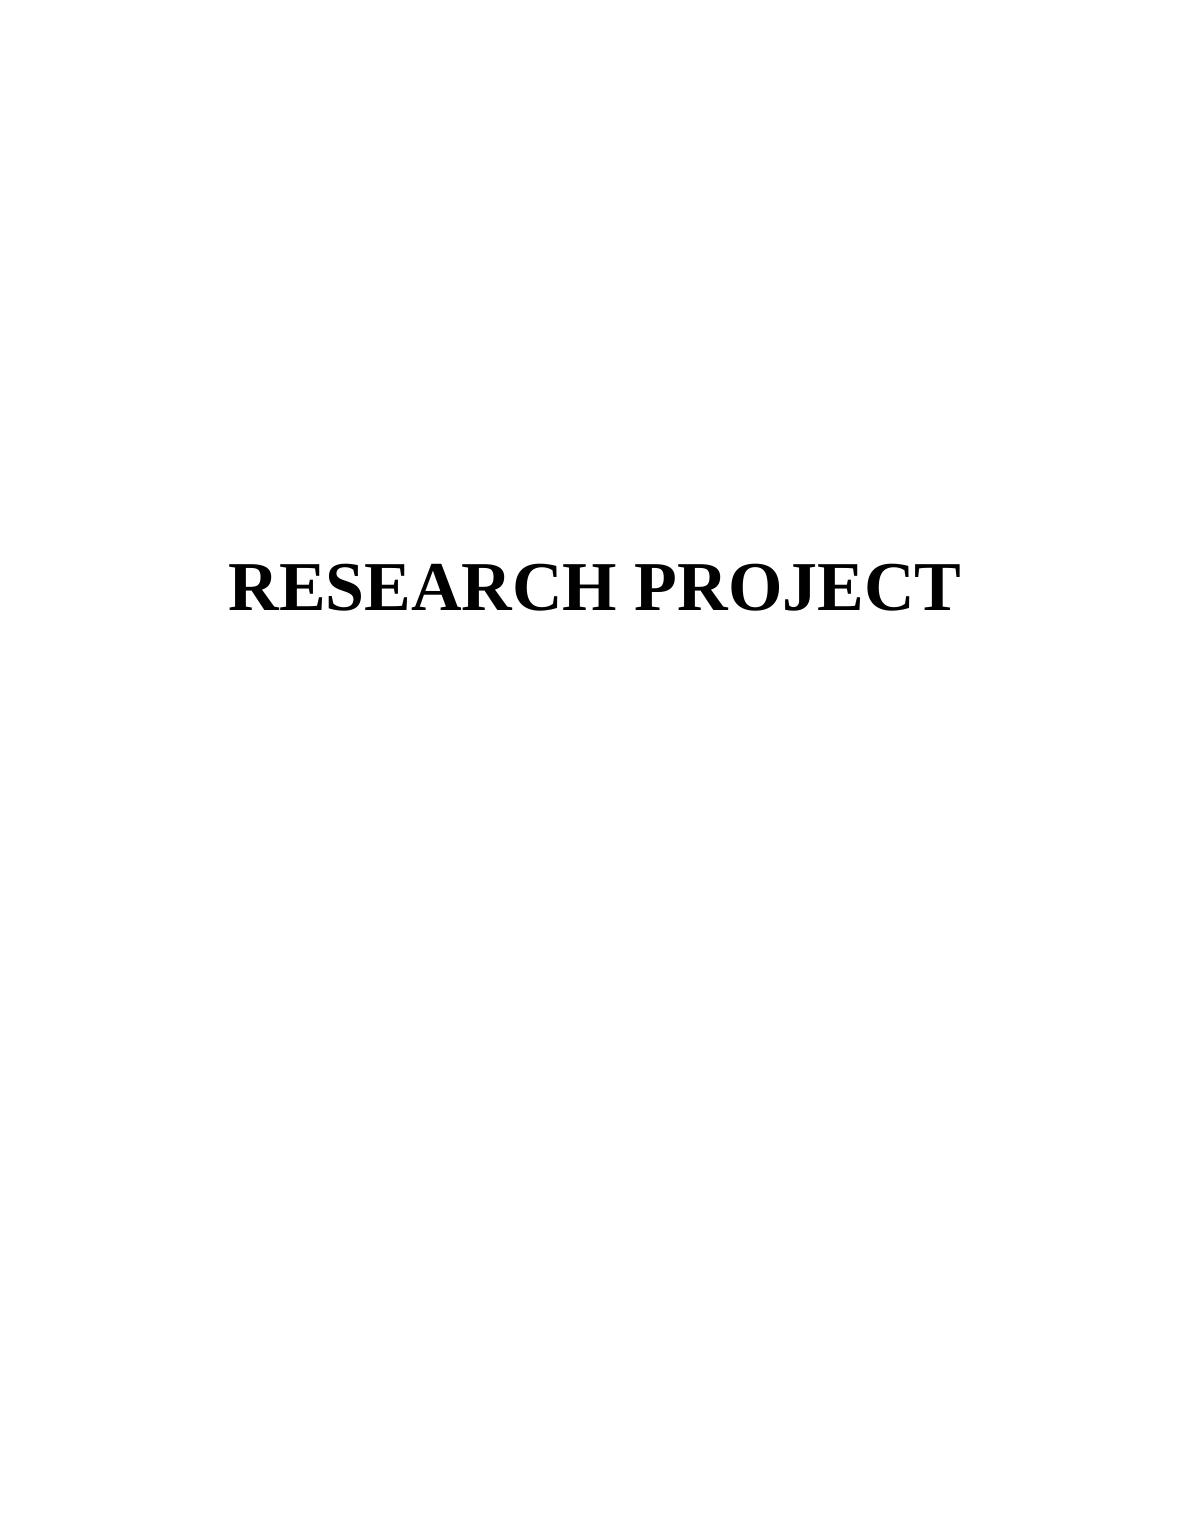 RESEARCH PROJECT CHAPTER 1:- INTRODUCTION 3 1.1 Overview. 3 1.2 Research questions.4 1.6 Research questions.4 1.6 Research questions.3 3.1 Research question.4 2.1 Research question.4 2.3 Research ques_1